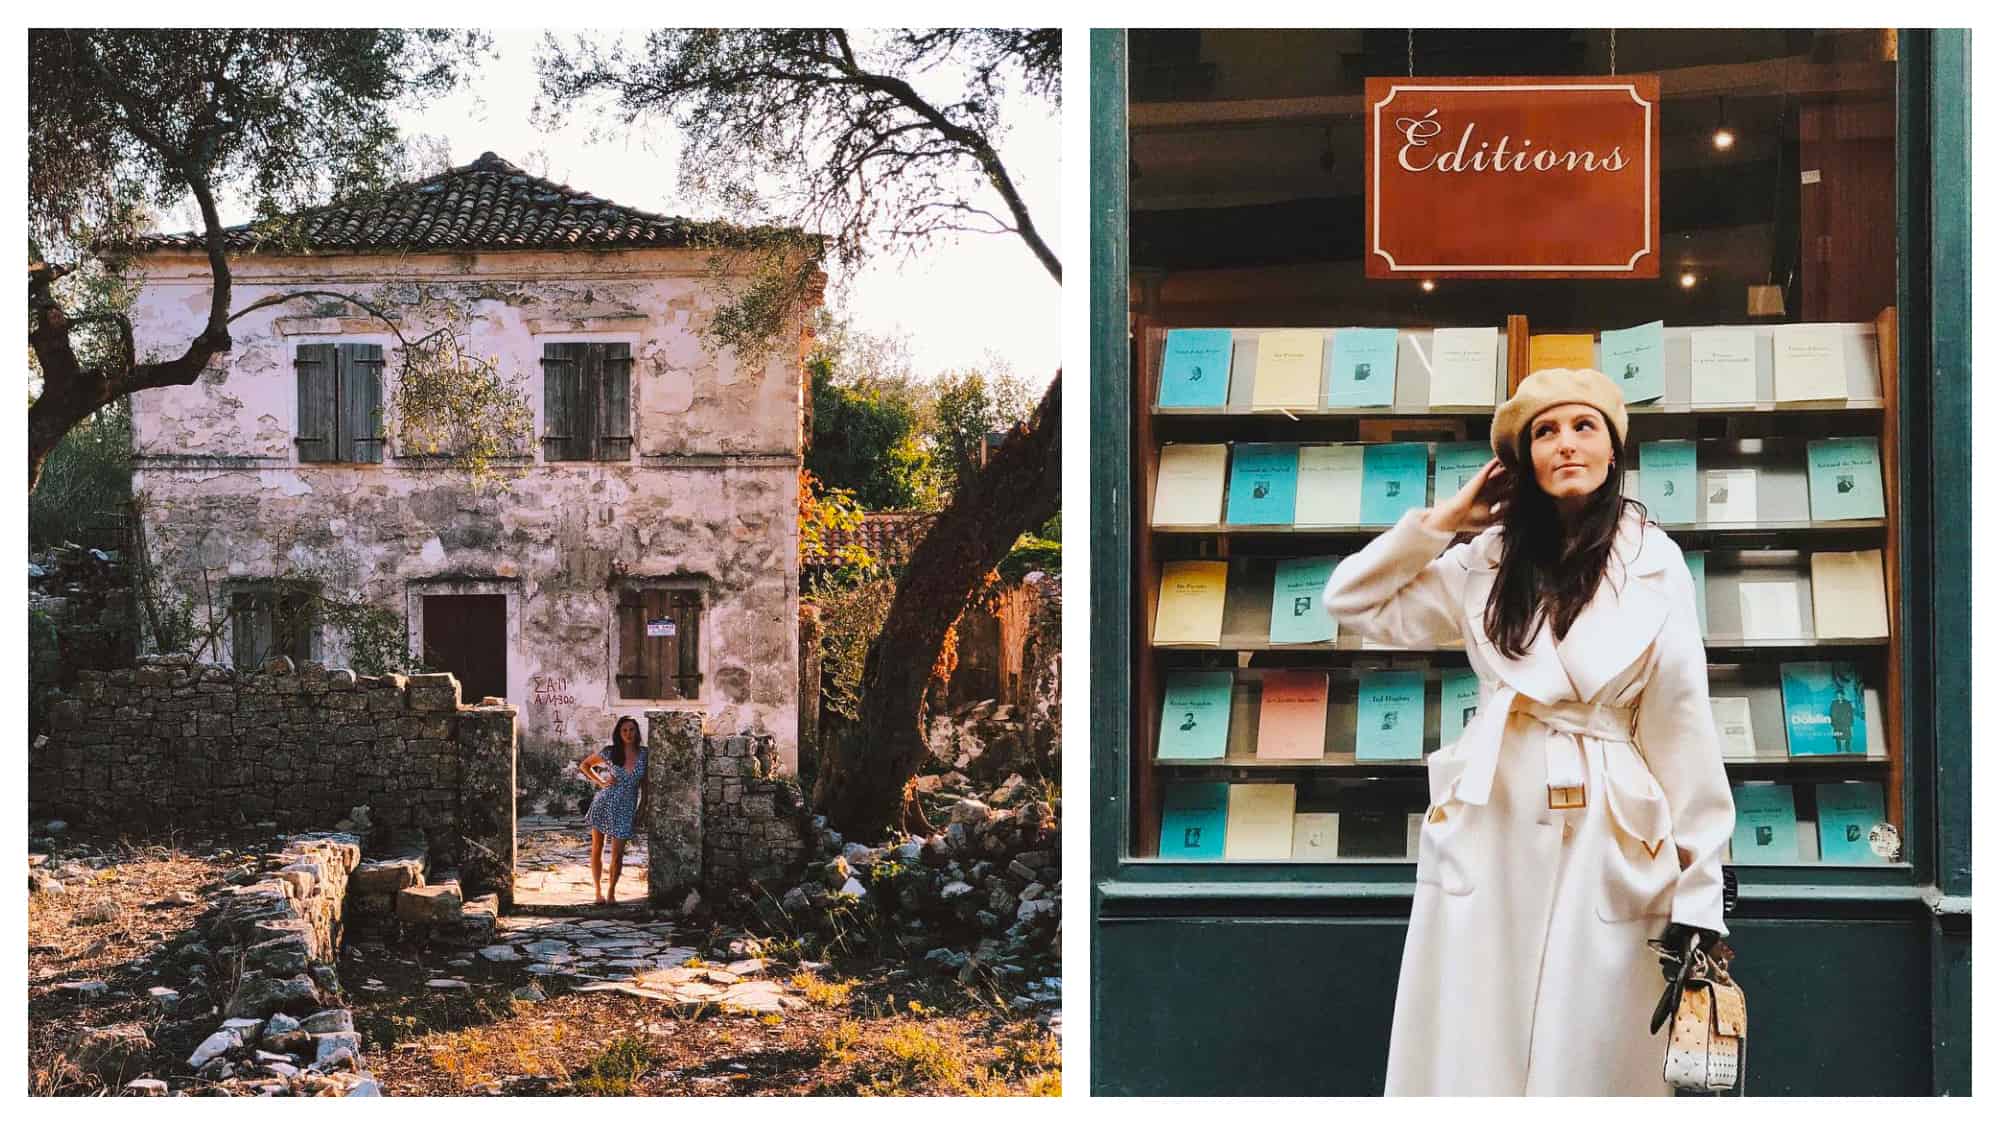 Left: Vanessa Grall, aka Messy Nessy, wears a blue dress and stands in front of an old house in the French countryside, Right: Vanessa Grall, aka Messy Nessy, wears a white coat and off-white hand, standing in front of a display of books in Paris.